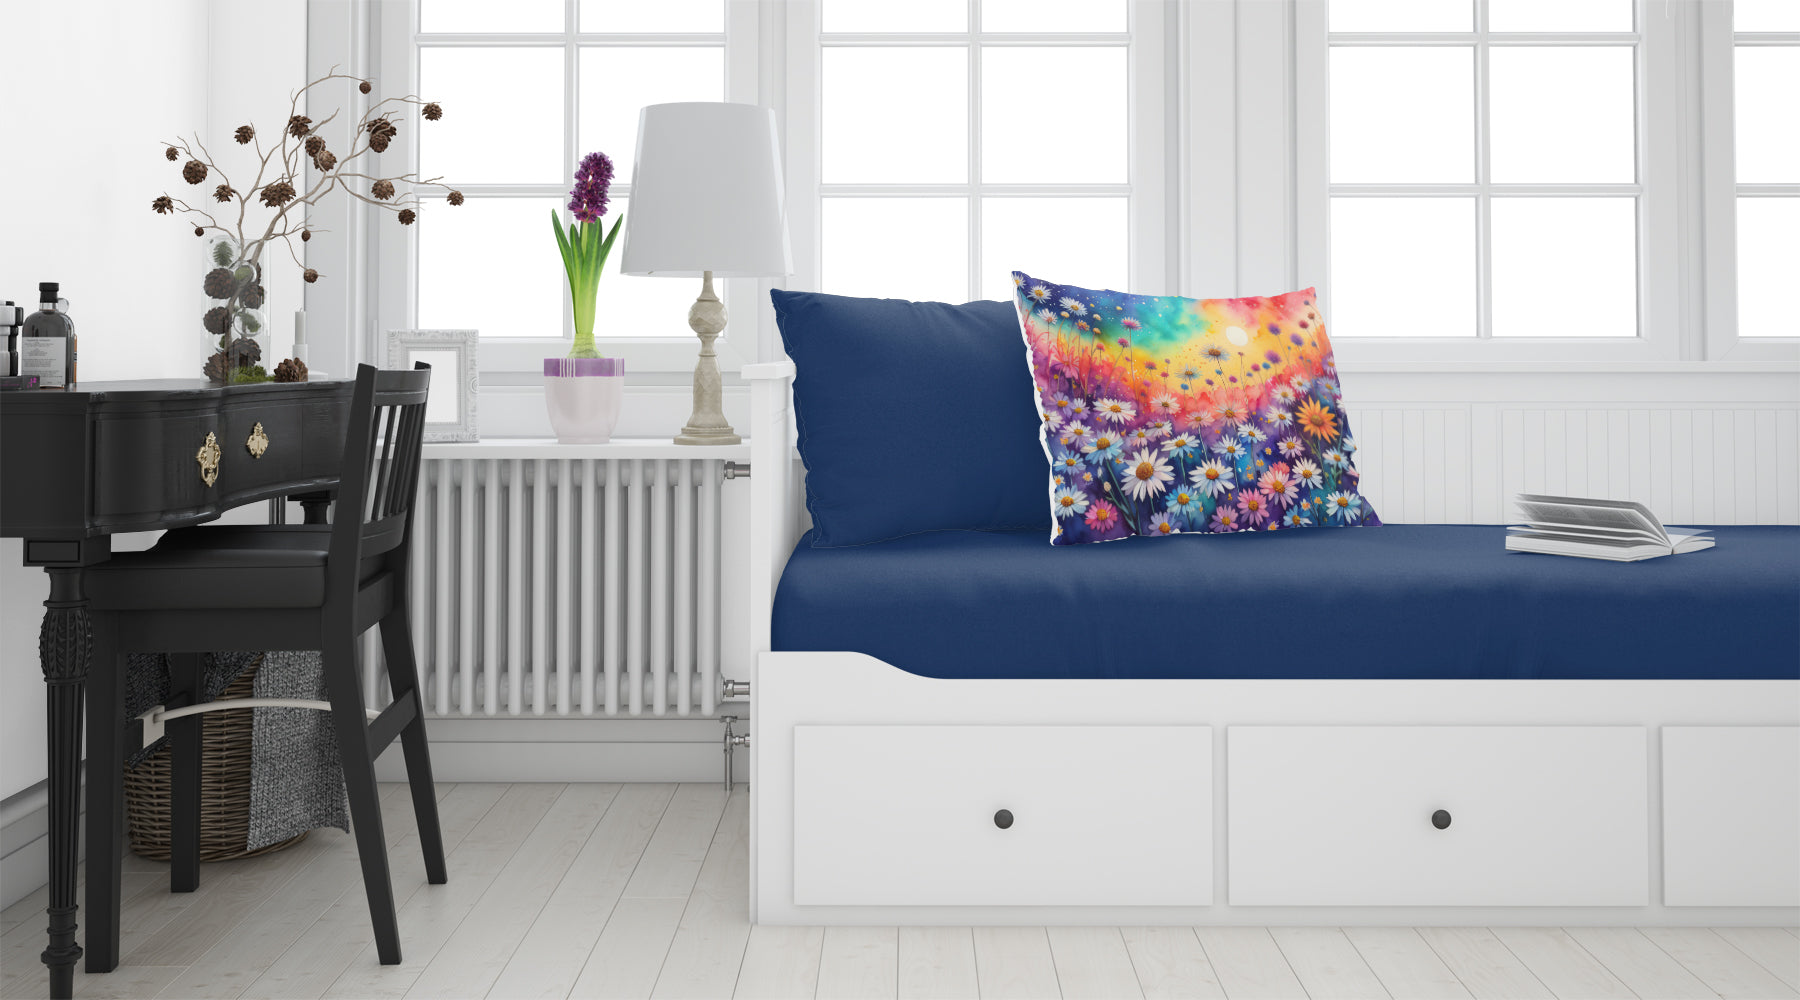 Buy this Asters in Color Fabric Standard Pillowcase